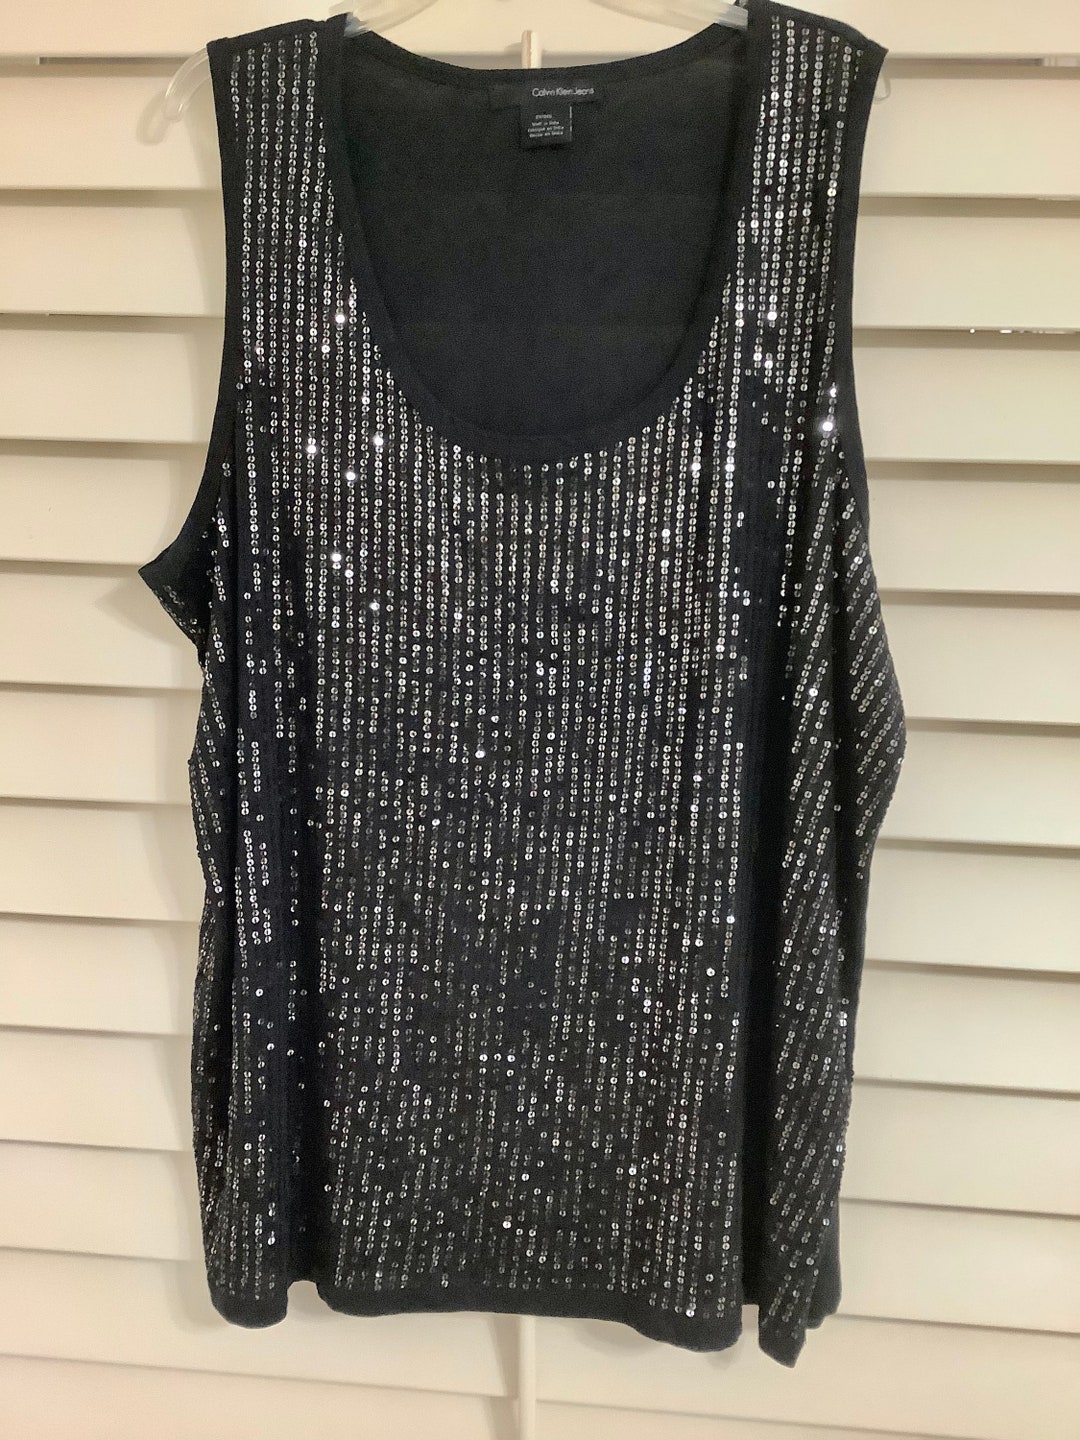 Calvin Klein Black Sequin Tank Top Size 2X Like New - Etsy